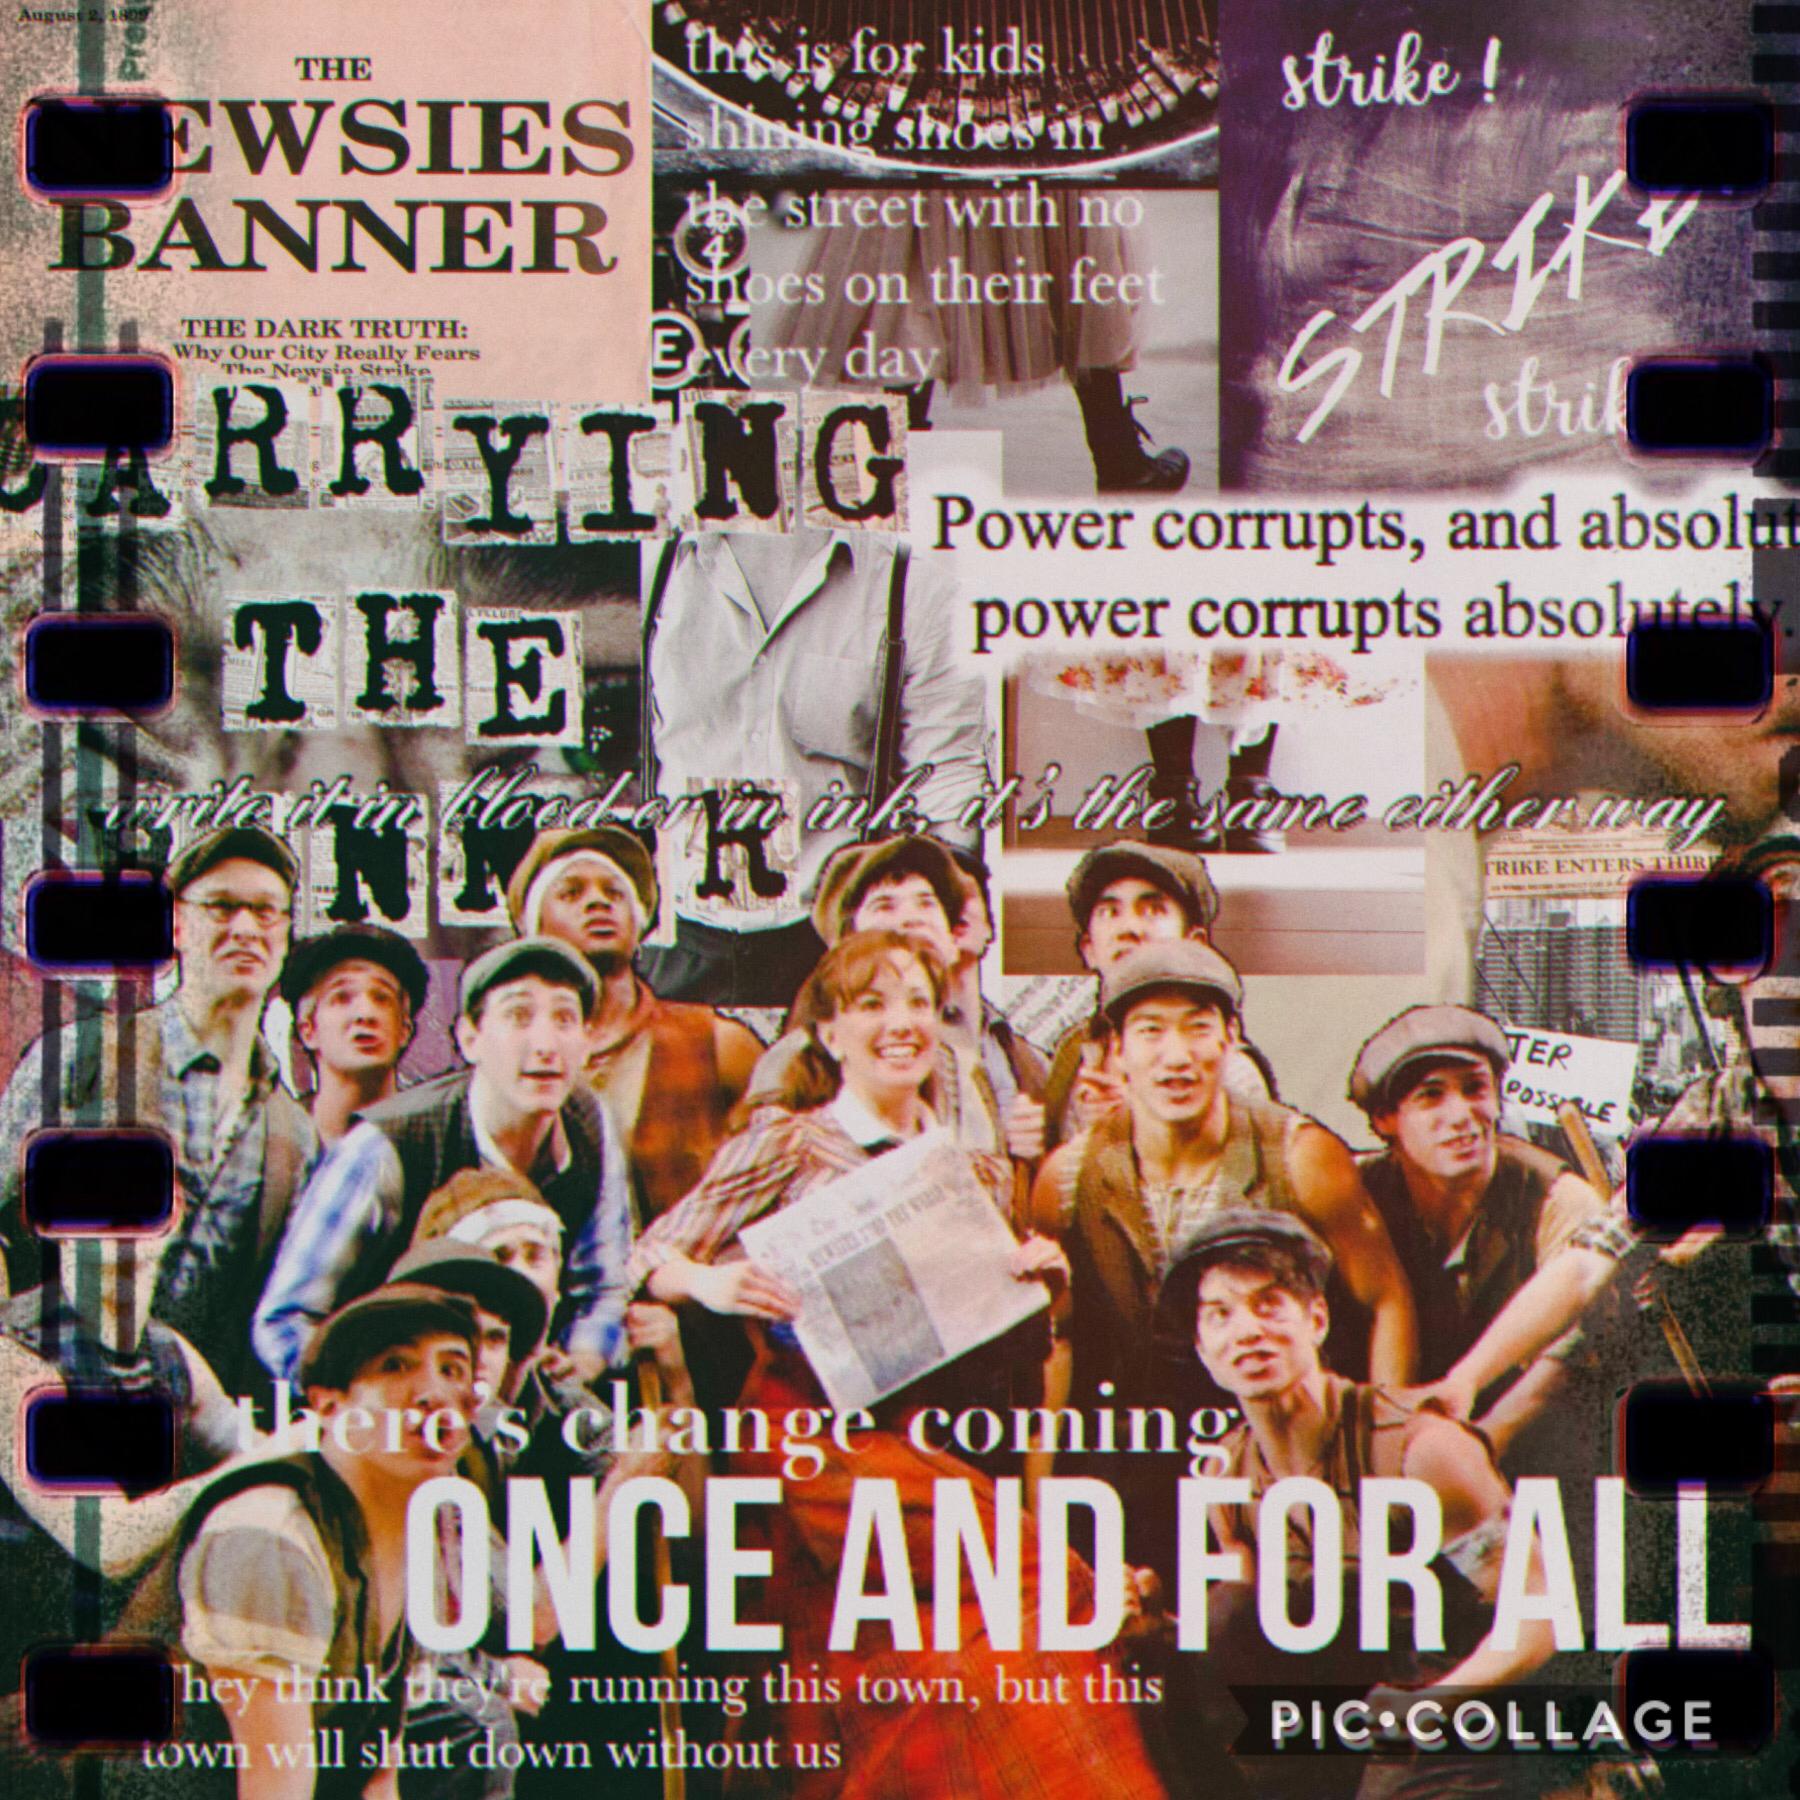 —tap—
“give life's little guys some ink, and when it dries just watch what happens”
an eDit ! FrOm mE ! w o w 😳 
I decided to do a newsies edit bc ,, I love newsies and I think the whole musical just has such a great message ✨ it’s on Disney+ and I really